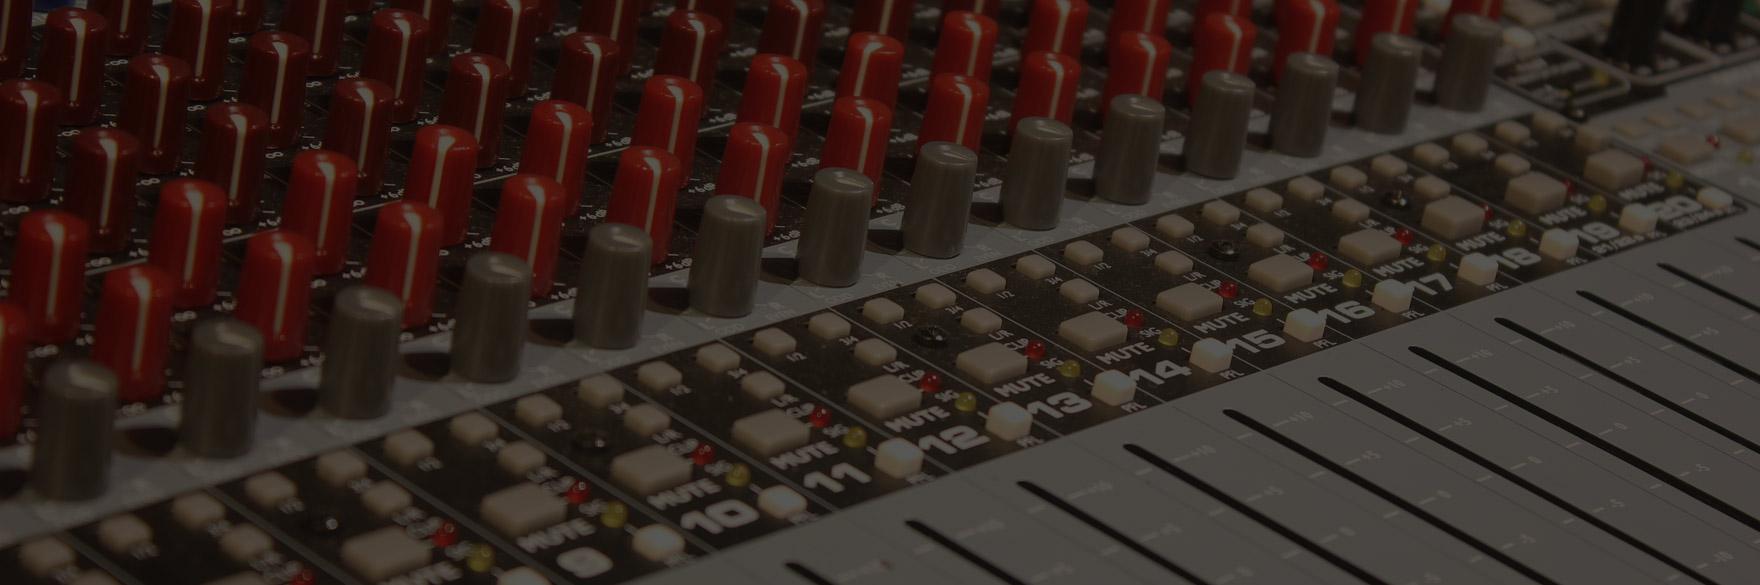 Why should you get your song mixed and mastered?